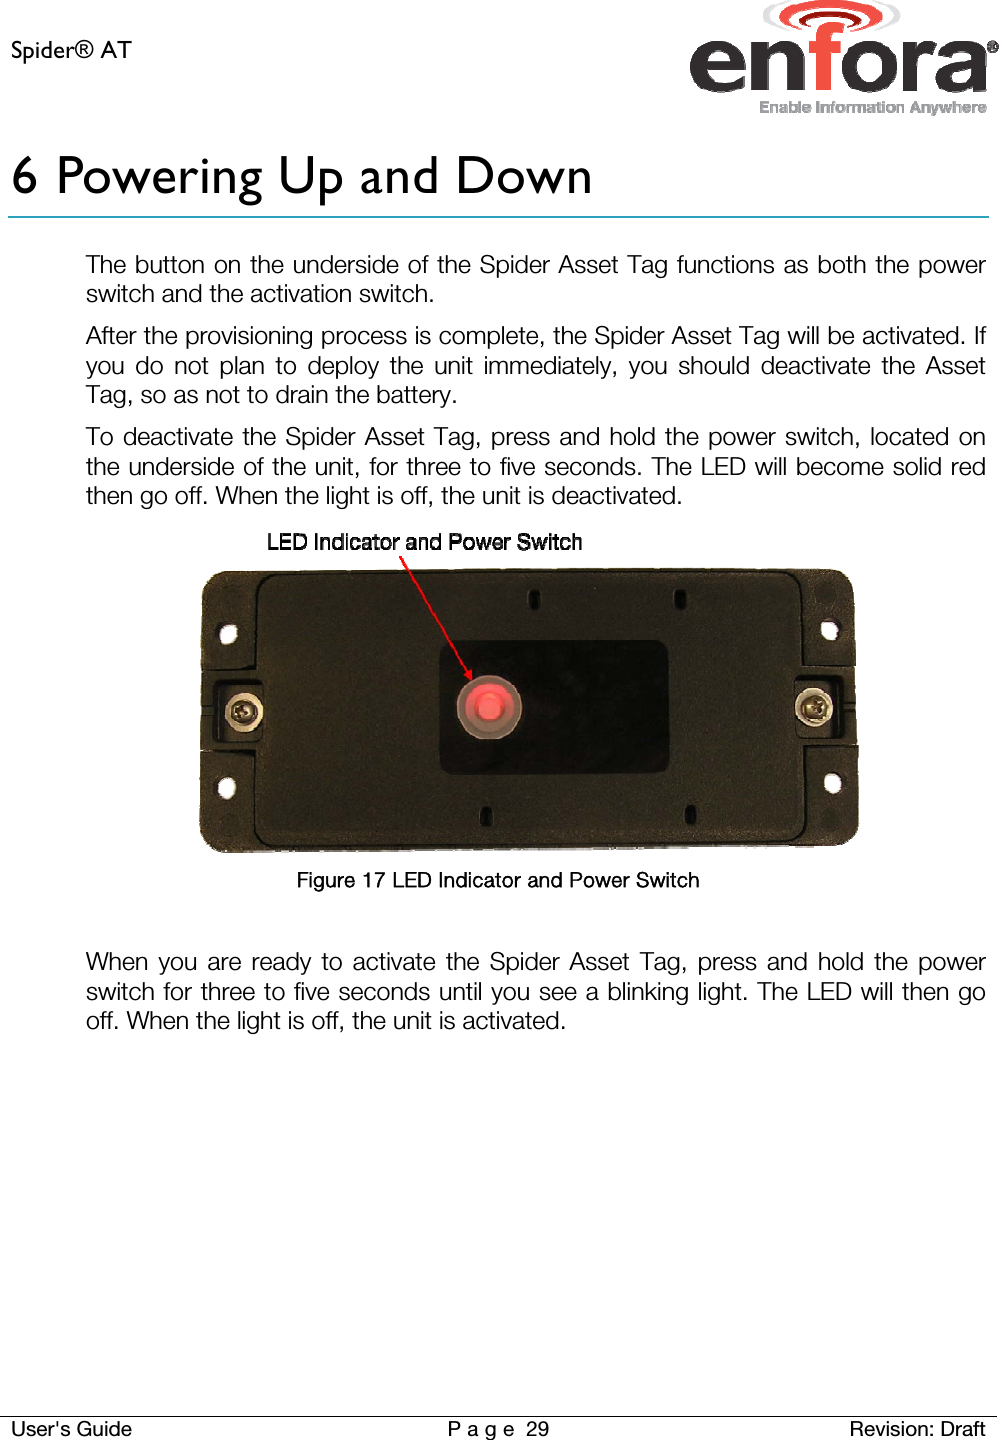 Spider® AT     User&apos;s Guide  P a g e 29 Revision: Draft 6 Powering Up and Down The button on the underside of the Spider Asset Tag functions as both the power switch and the activation switch.  After the provisioning process is complete, the Spider Asset Tag will be activated. If you do not plan to deploy the unit immediately, you should deactivate the Asset Tag, so as not to drain the battery. To deactivate the Spider Asset Tag, press and hold the power switch, located on the underside of the unit, for three to five seconds. The LED will become solid red then go off. When the light is off, the unit is deactivated.  Figure 17 LED Indicator and Power Switch  When you are ready to activate the Spider Asset Tag, press and hold the power switch for three to five seconds until you see a blinking light. The LED will then go off. When the light is off, the unit is activated.     